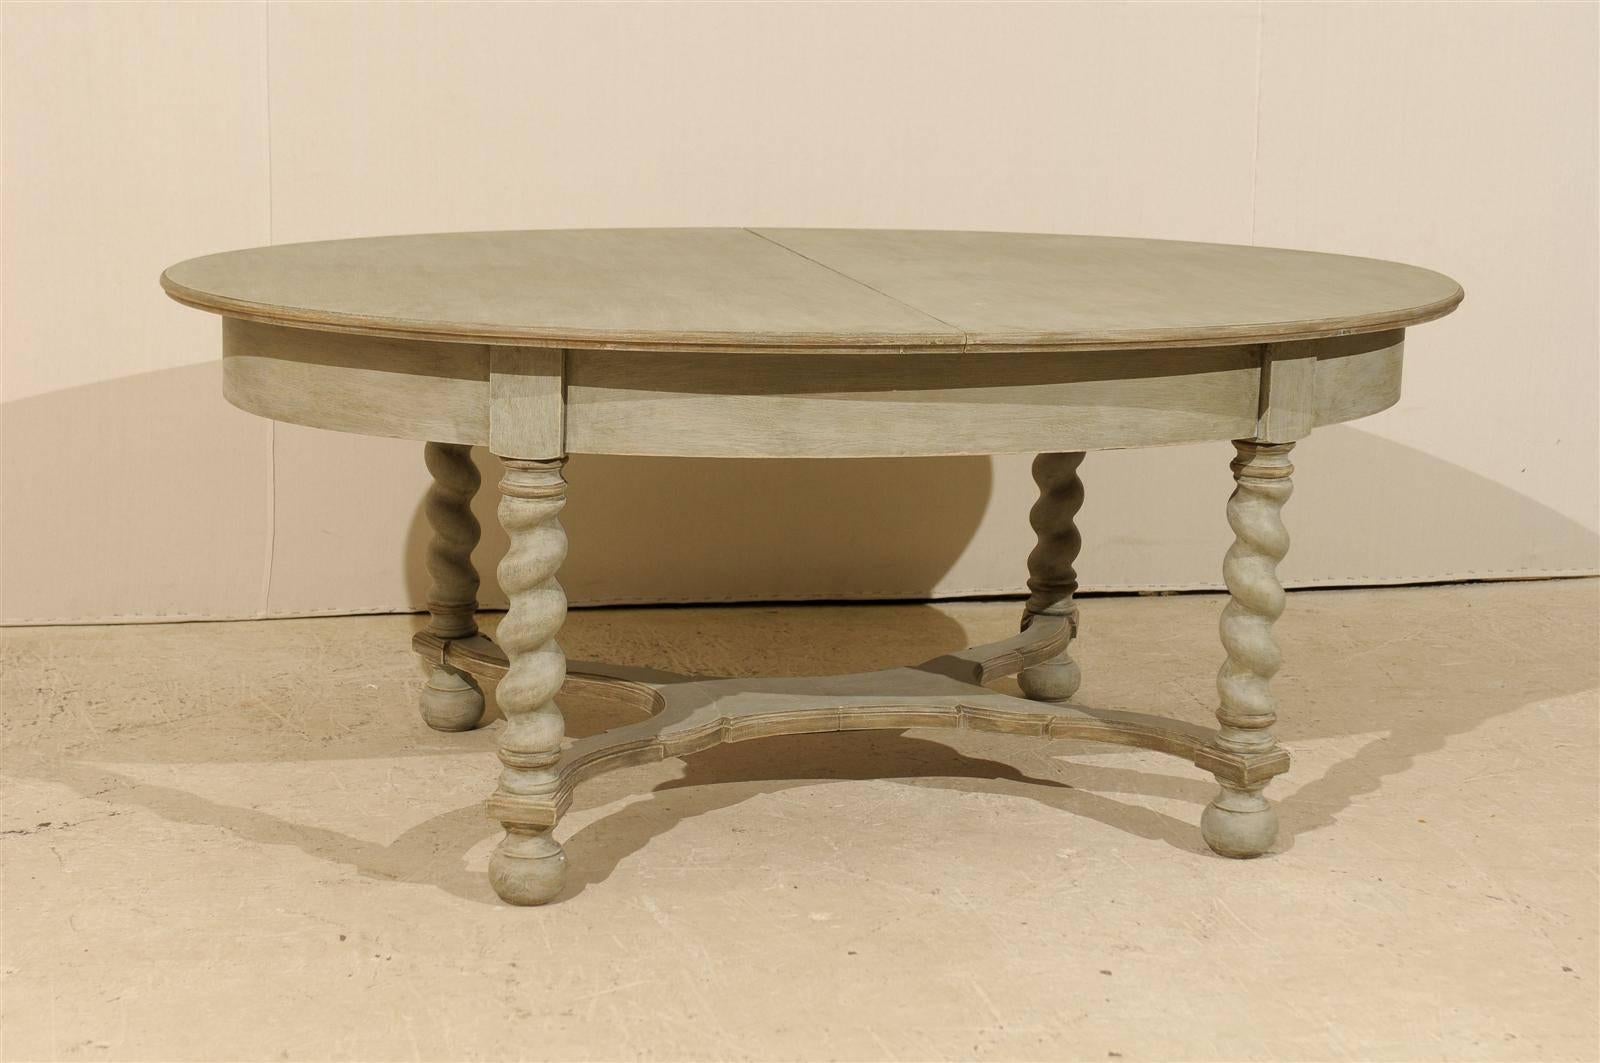 Painted Swedish Baroque Style Oval Table from the Mid-20th Century For Sale